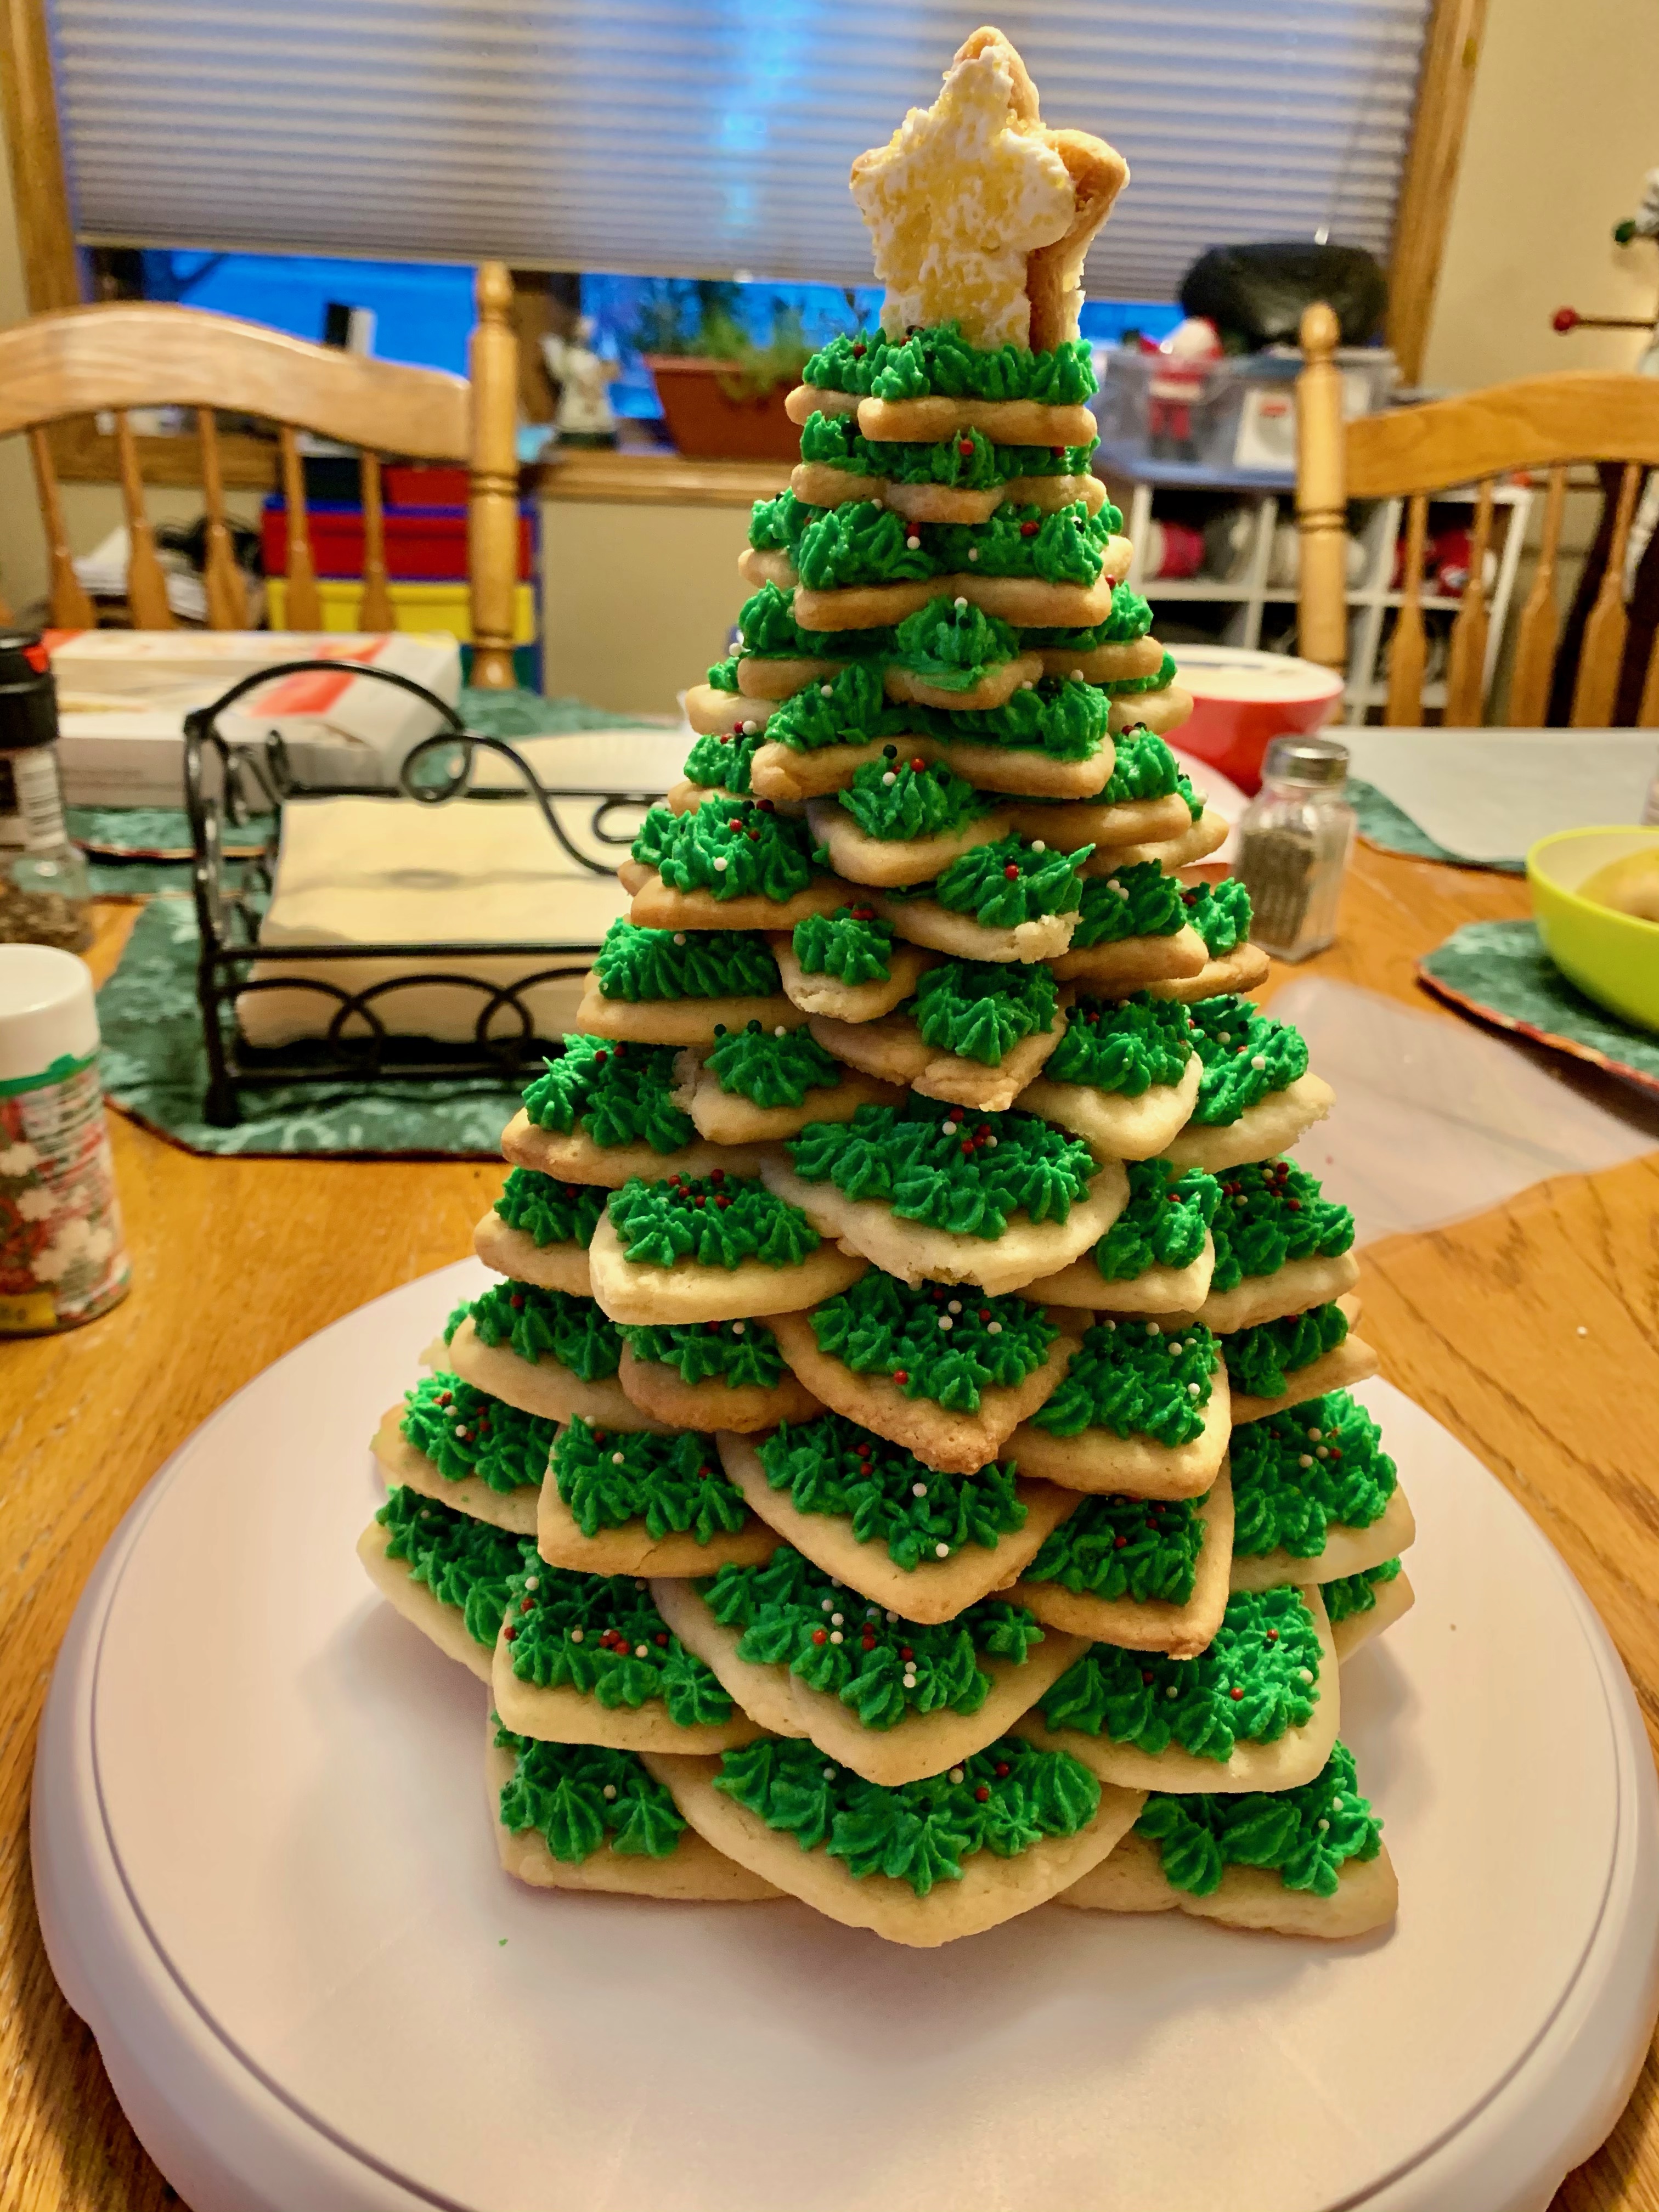 Christmas tree made of increasingly smaller iced cookies